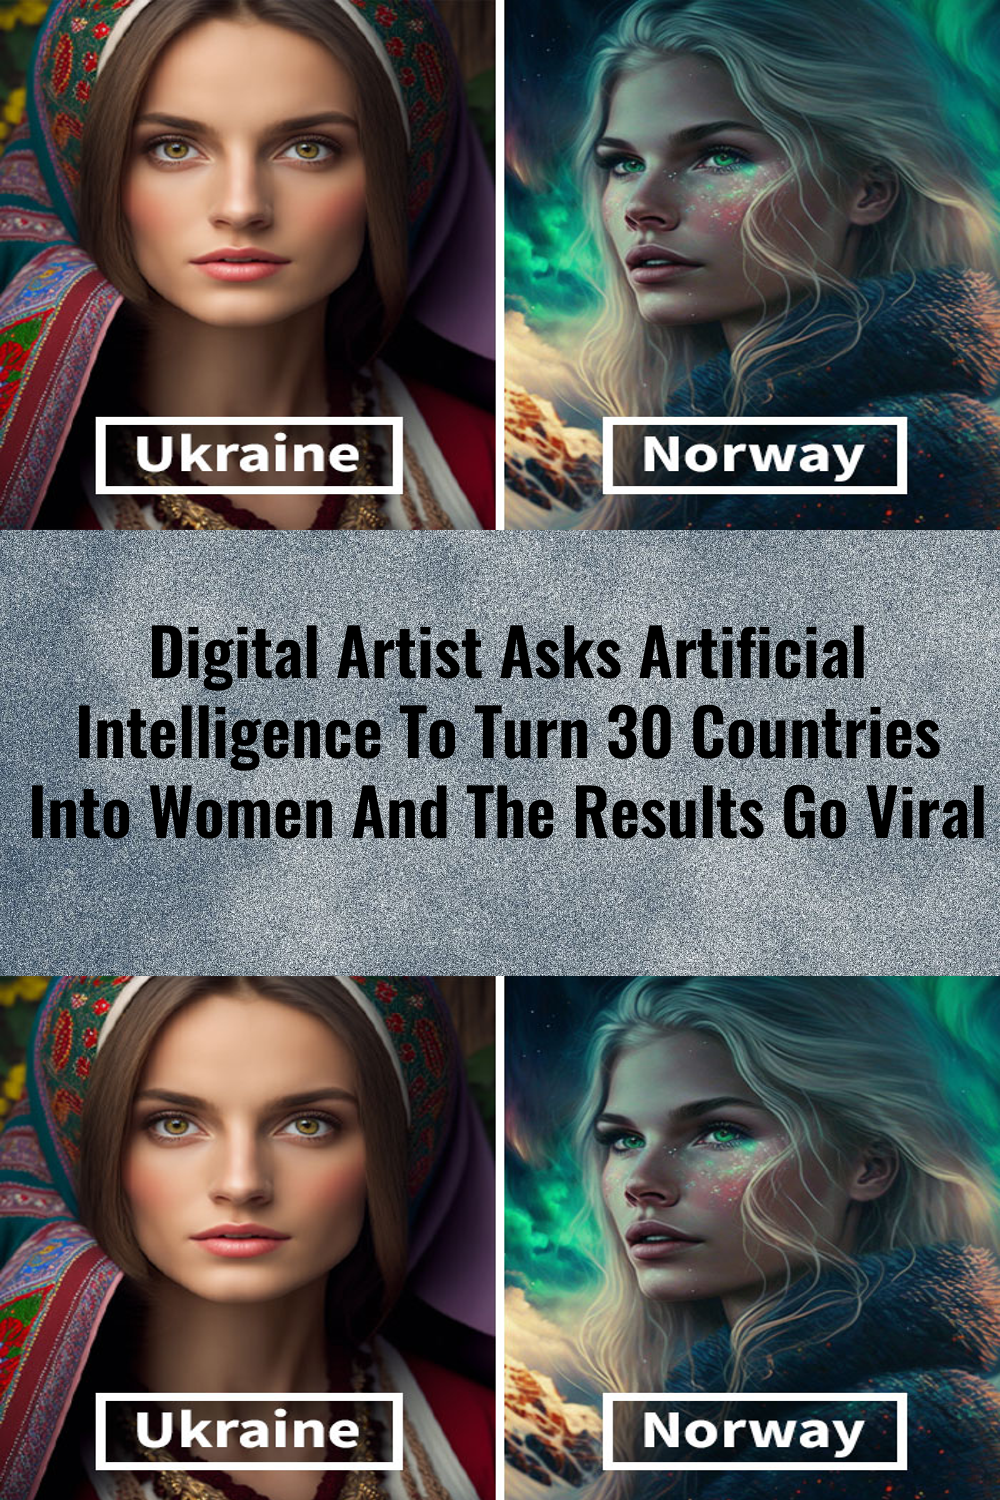 Digital Artist Asks Artificial Intelligence To Turn 30 Countries Into Women, And The Results Go Vira